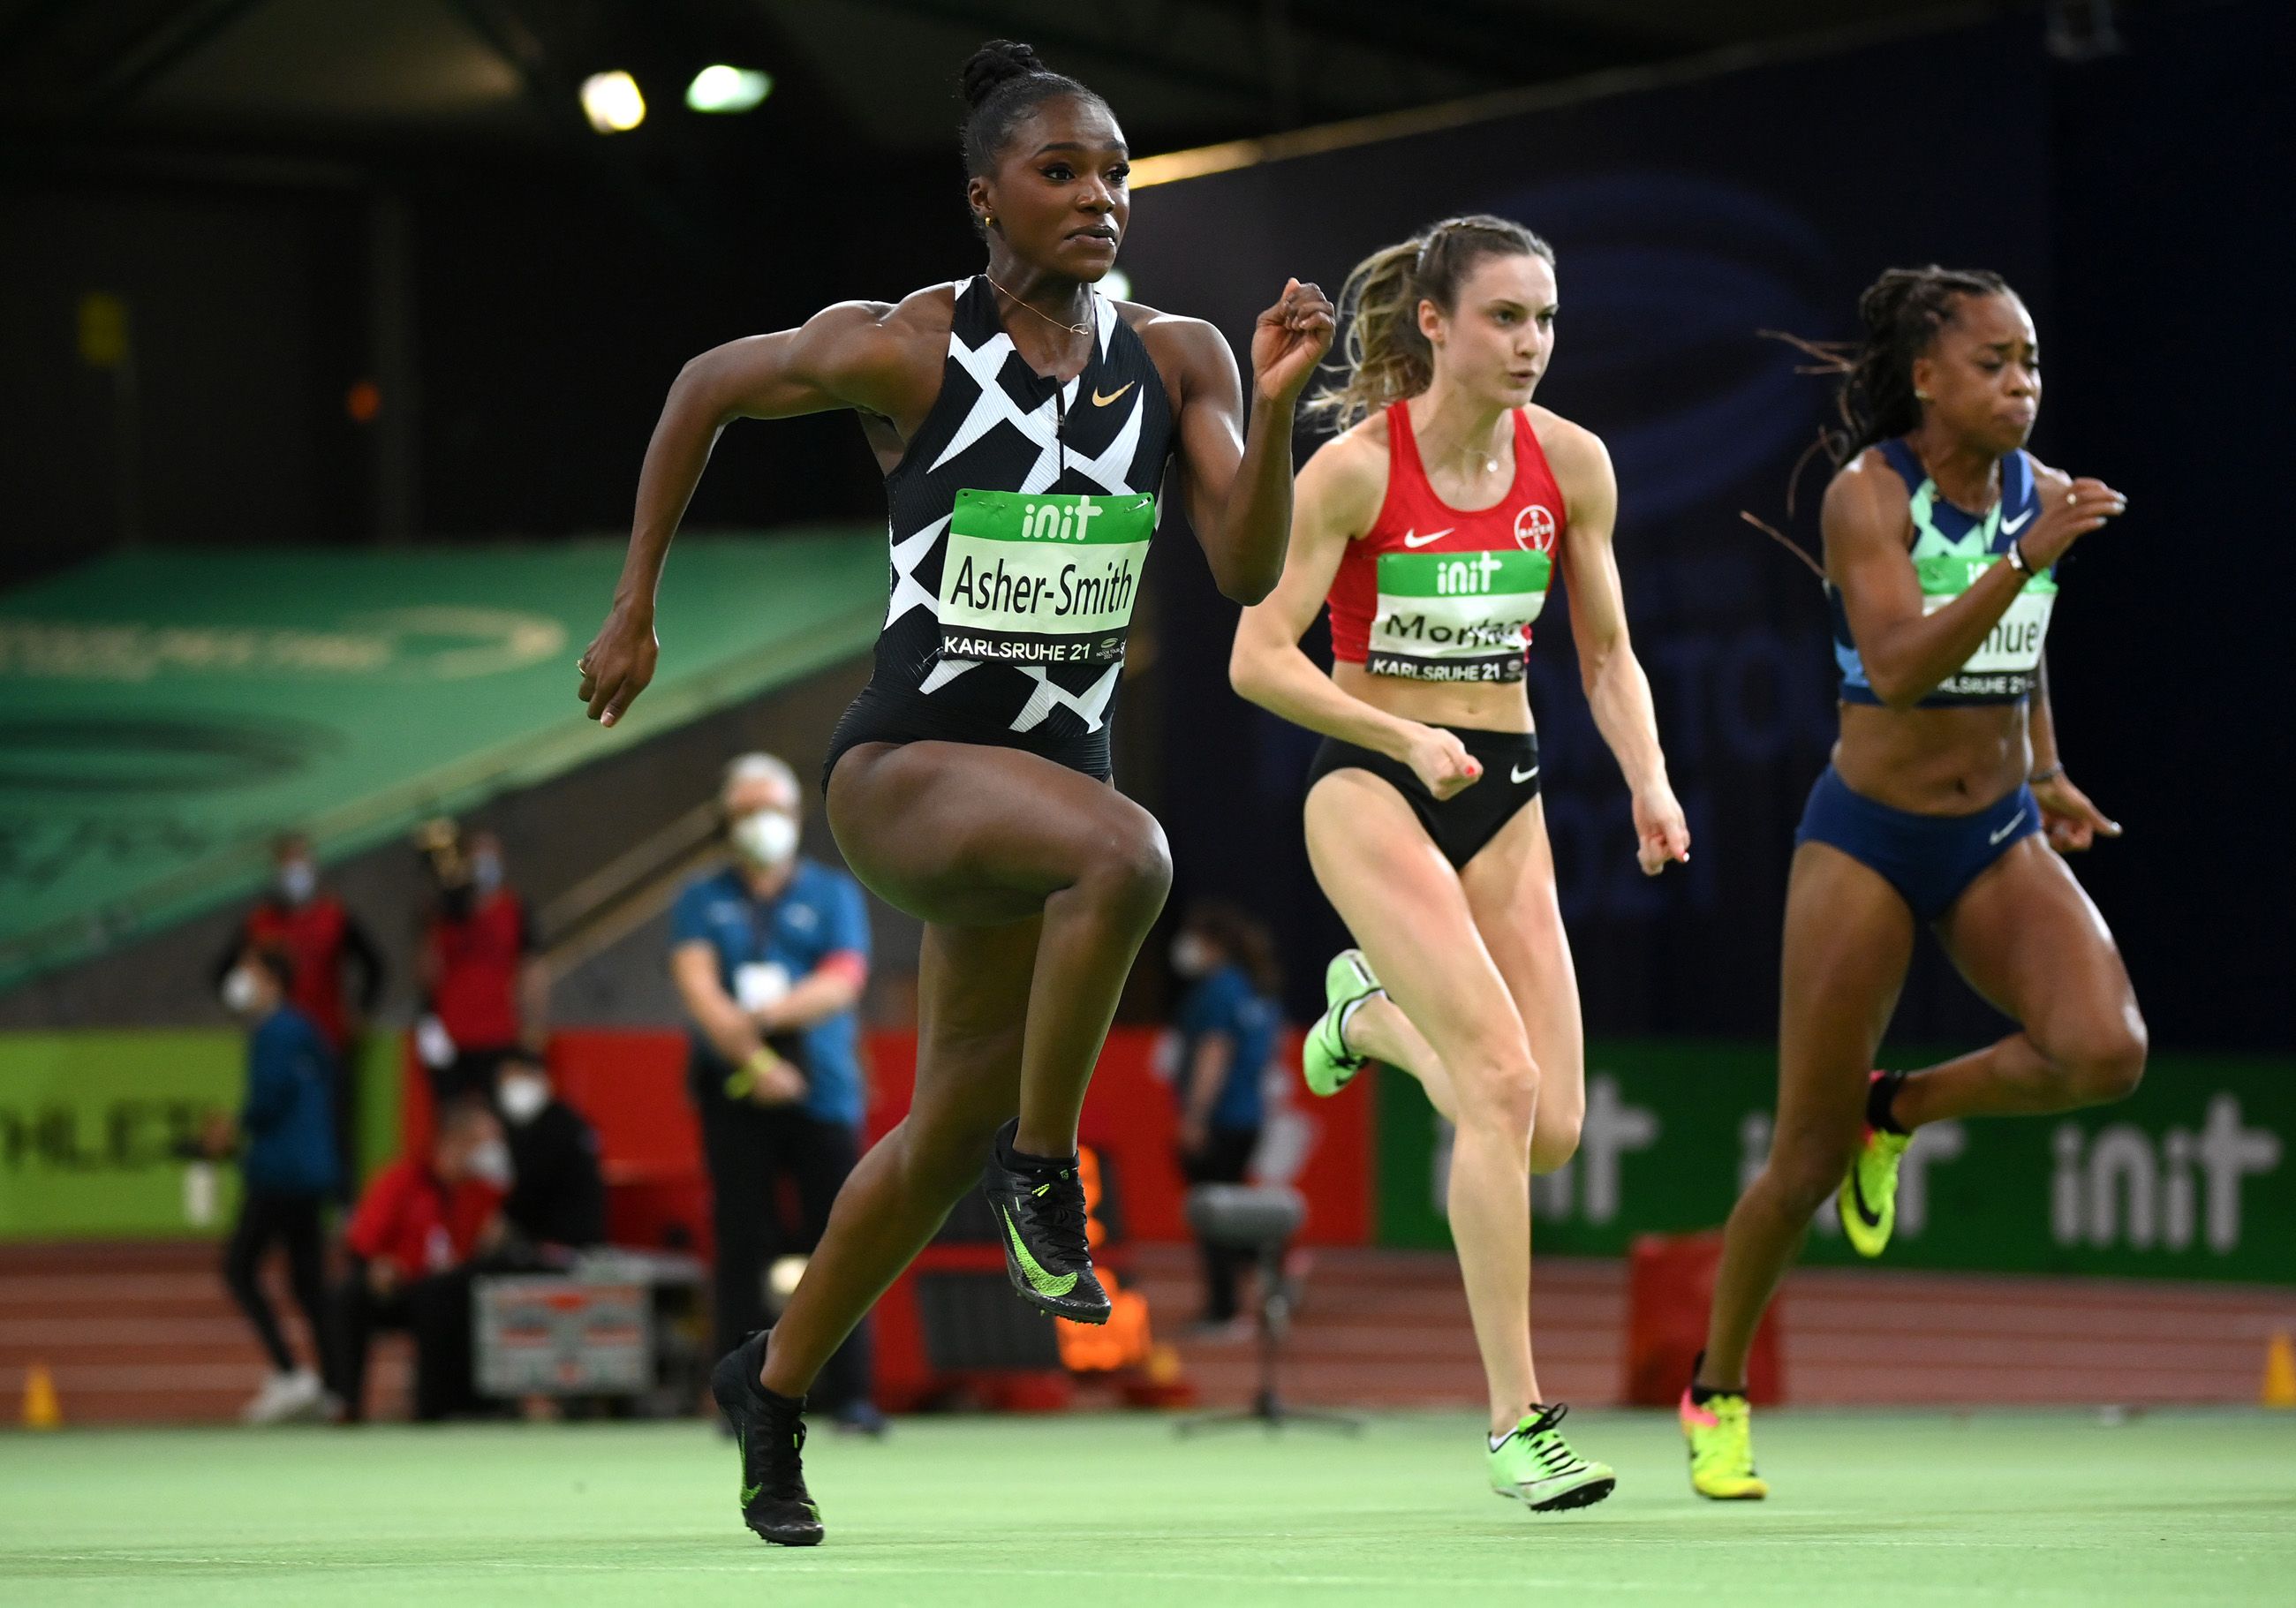 Dina Asher-Smith in the 60m at the Indoor Meeting Karlsruhe